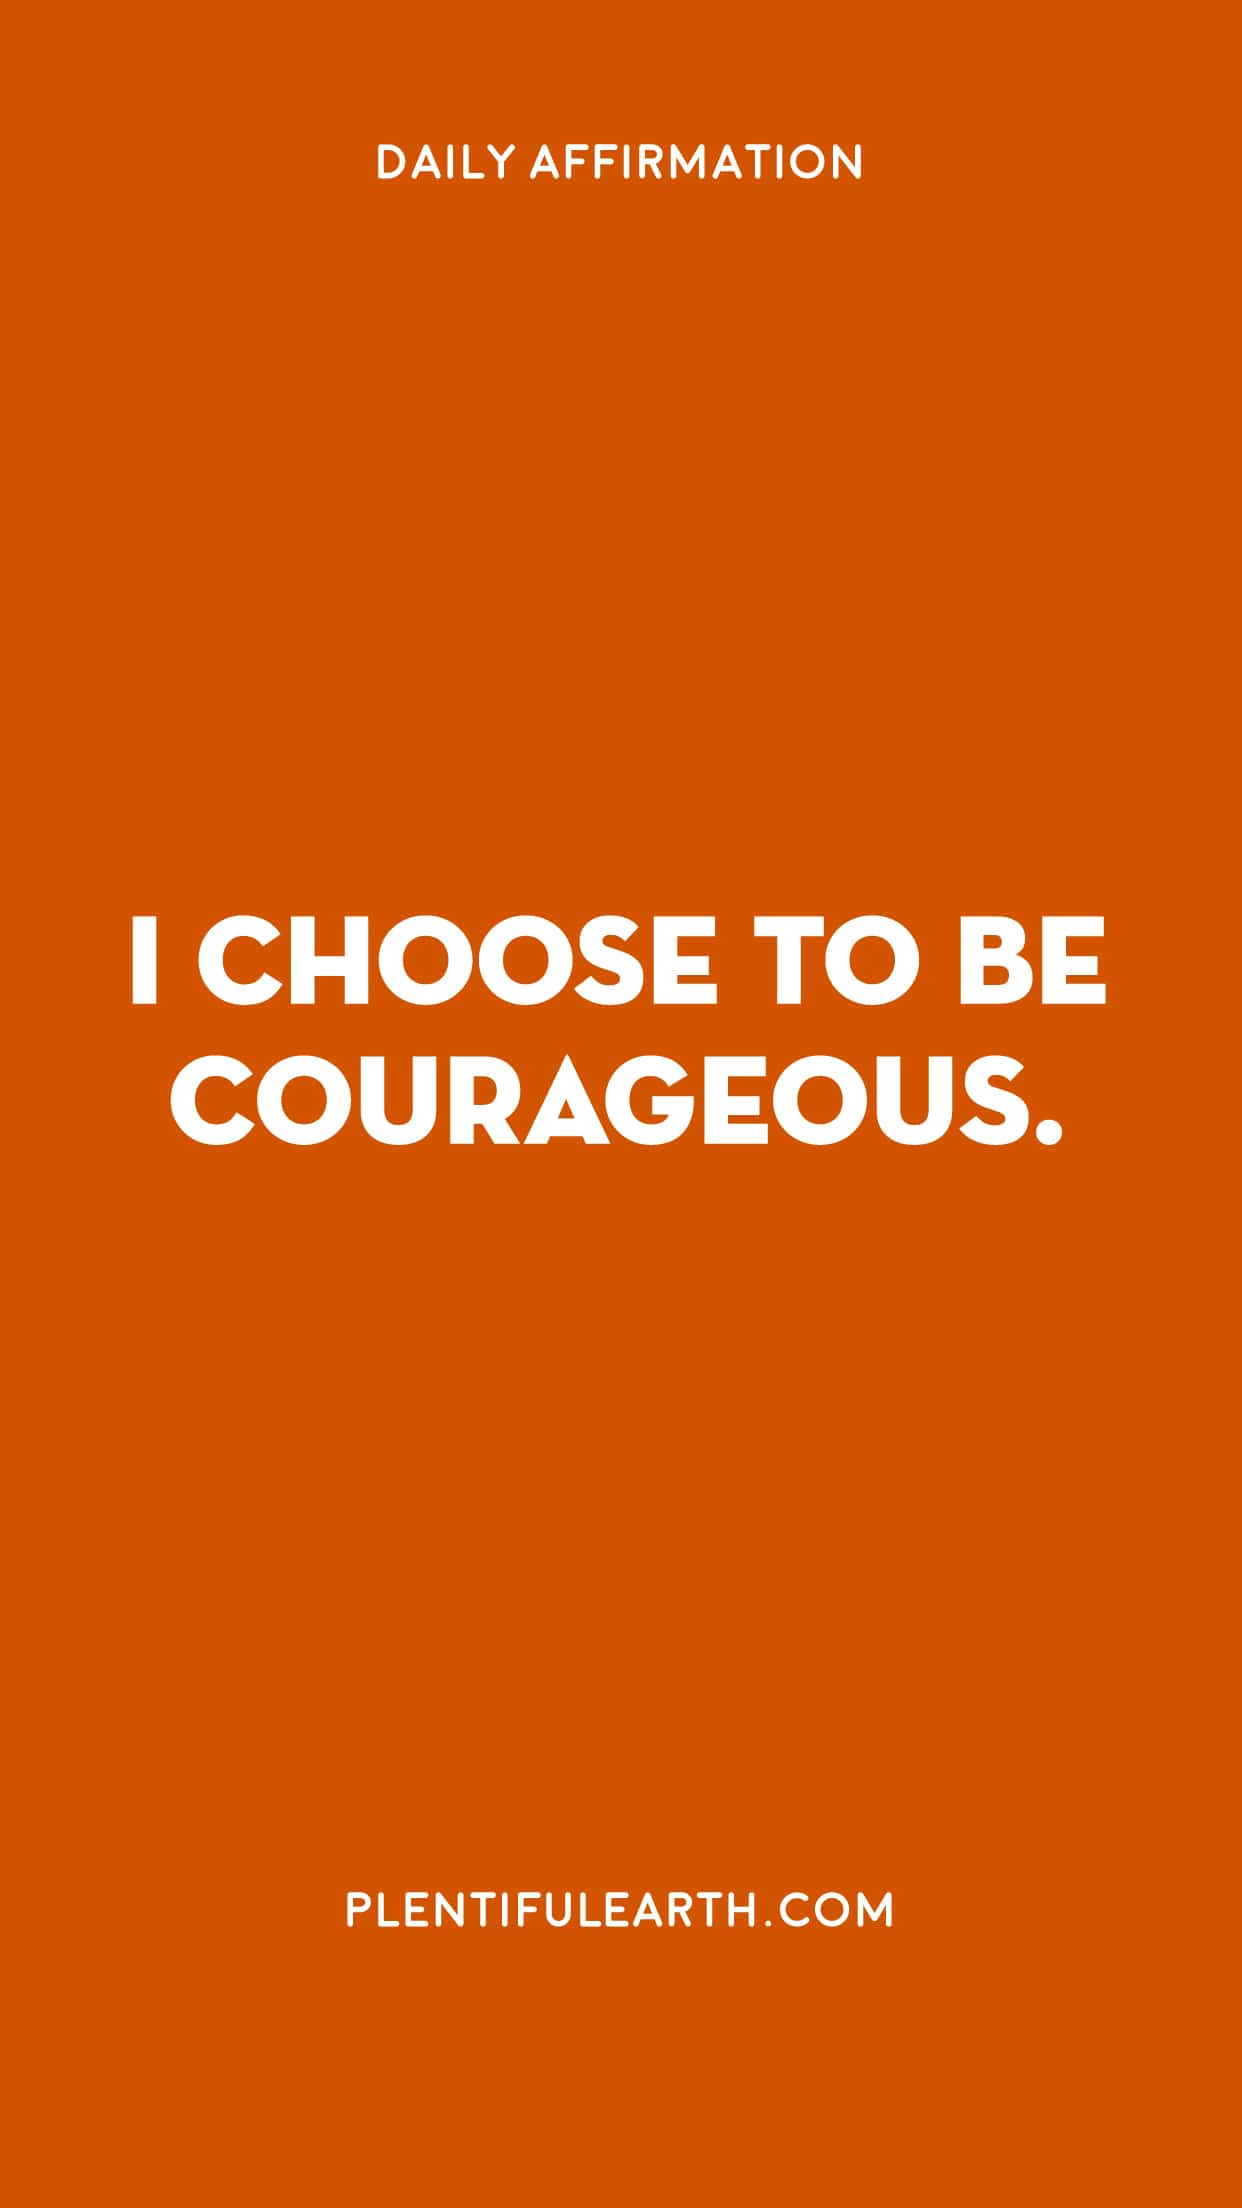 An orange background featuring a witchy, motivational daily affirmation that says 'i choose to be courageous,' attributed to plentifulearth.com.